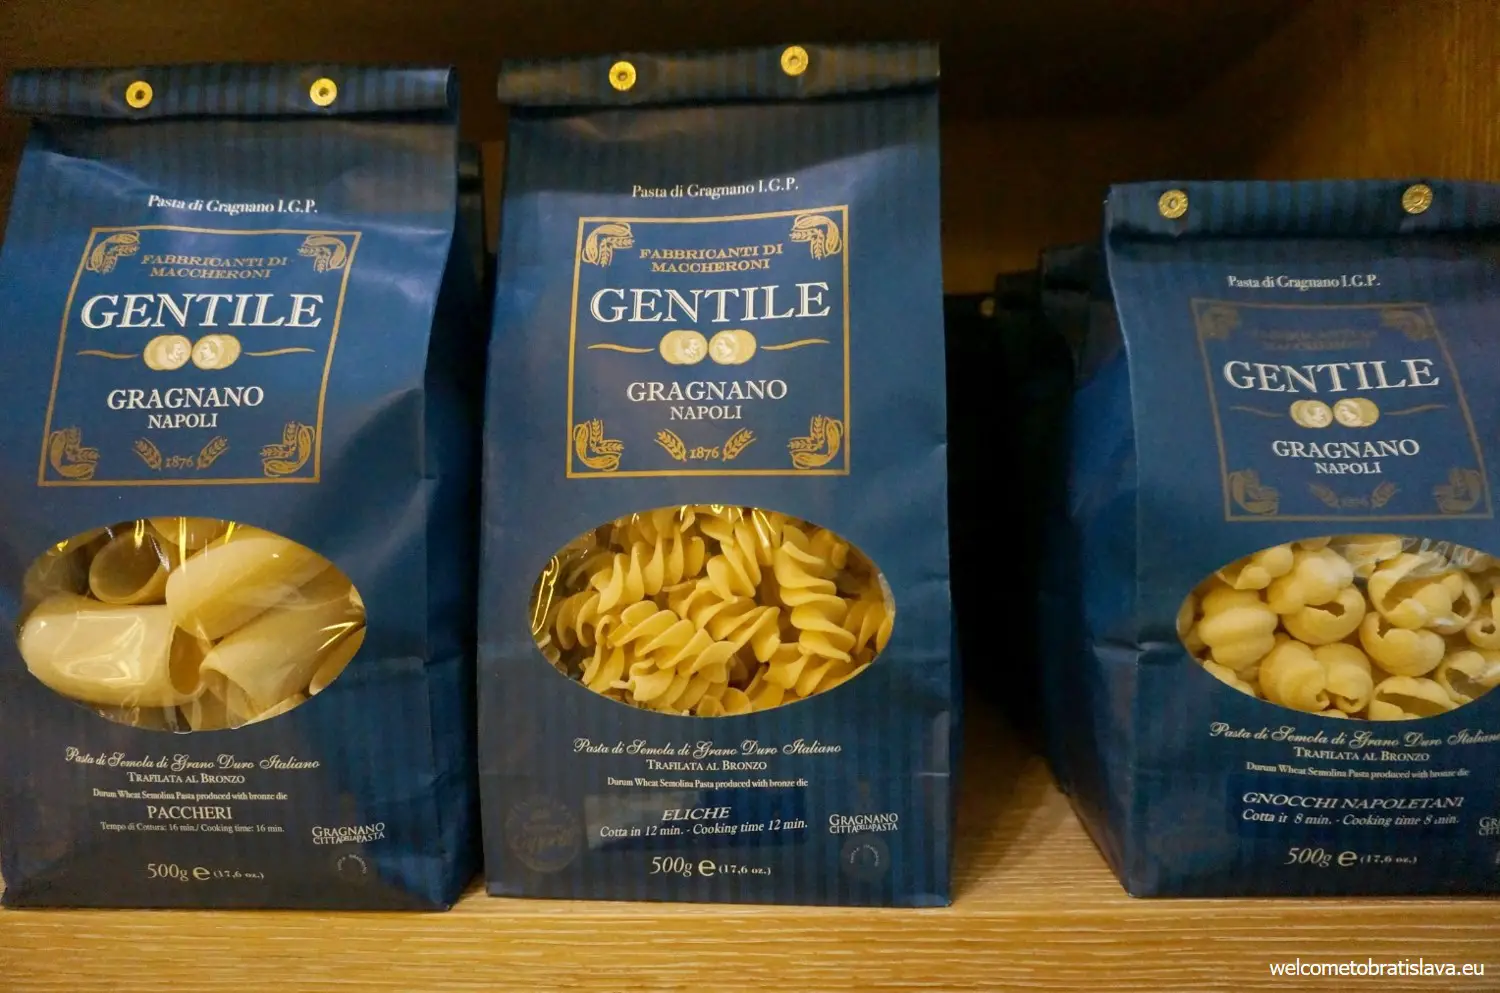 You can buy short and long pasta in Pane & Olio.